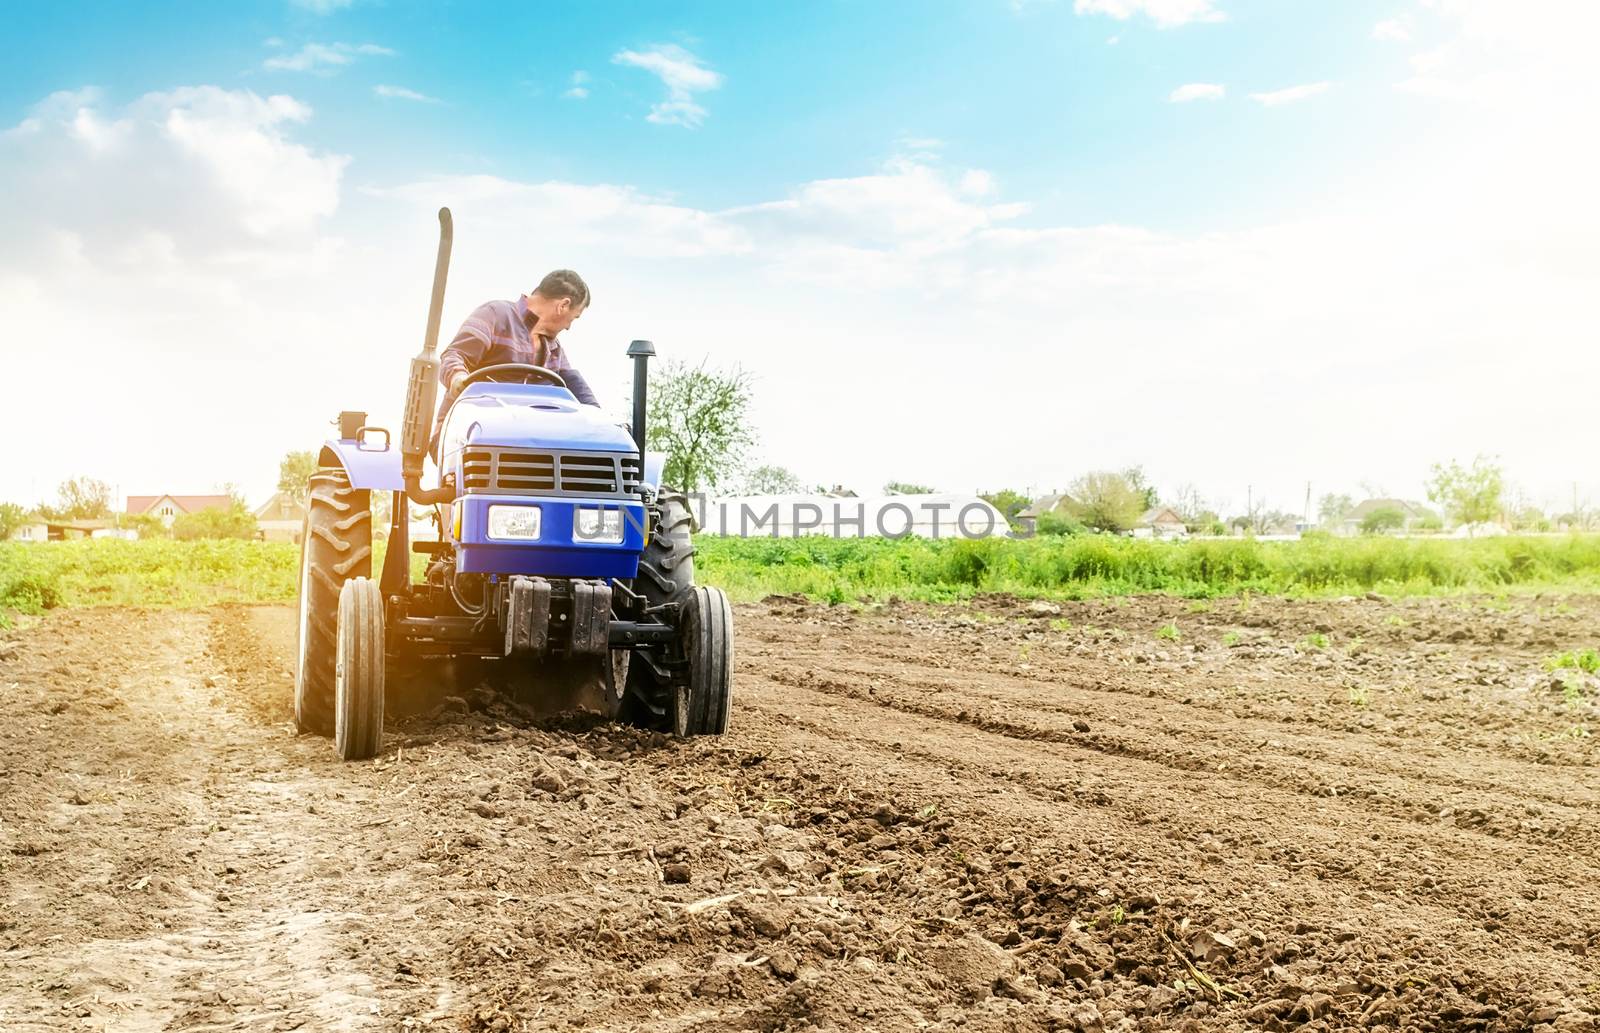 Farmer is processing soil on a tractor. Soil milling, crumbling mixing. Loosening surface, cultivating land for further planting. Agriculture, growing organic food vegetables. Agroindustry, farming. by iLixe48